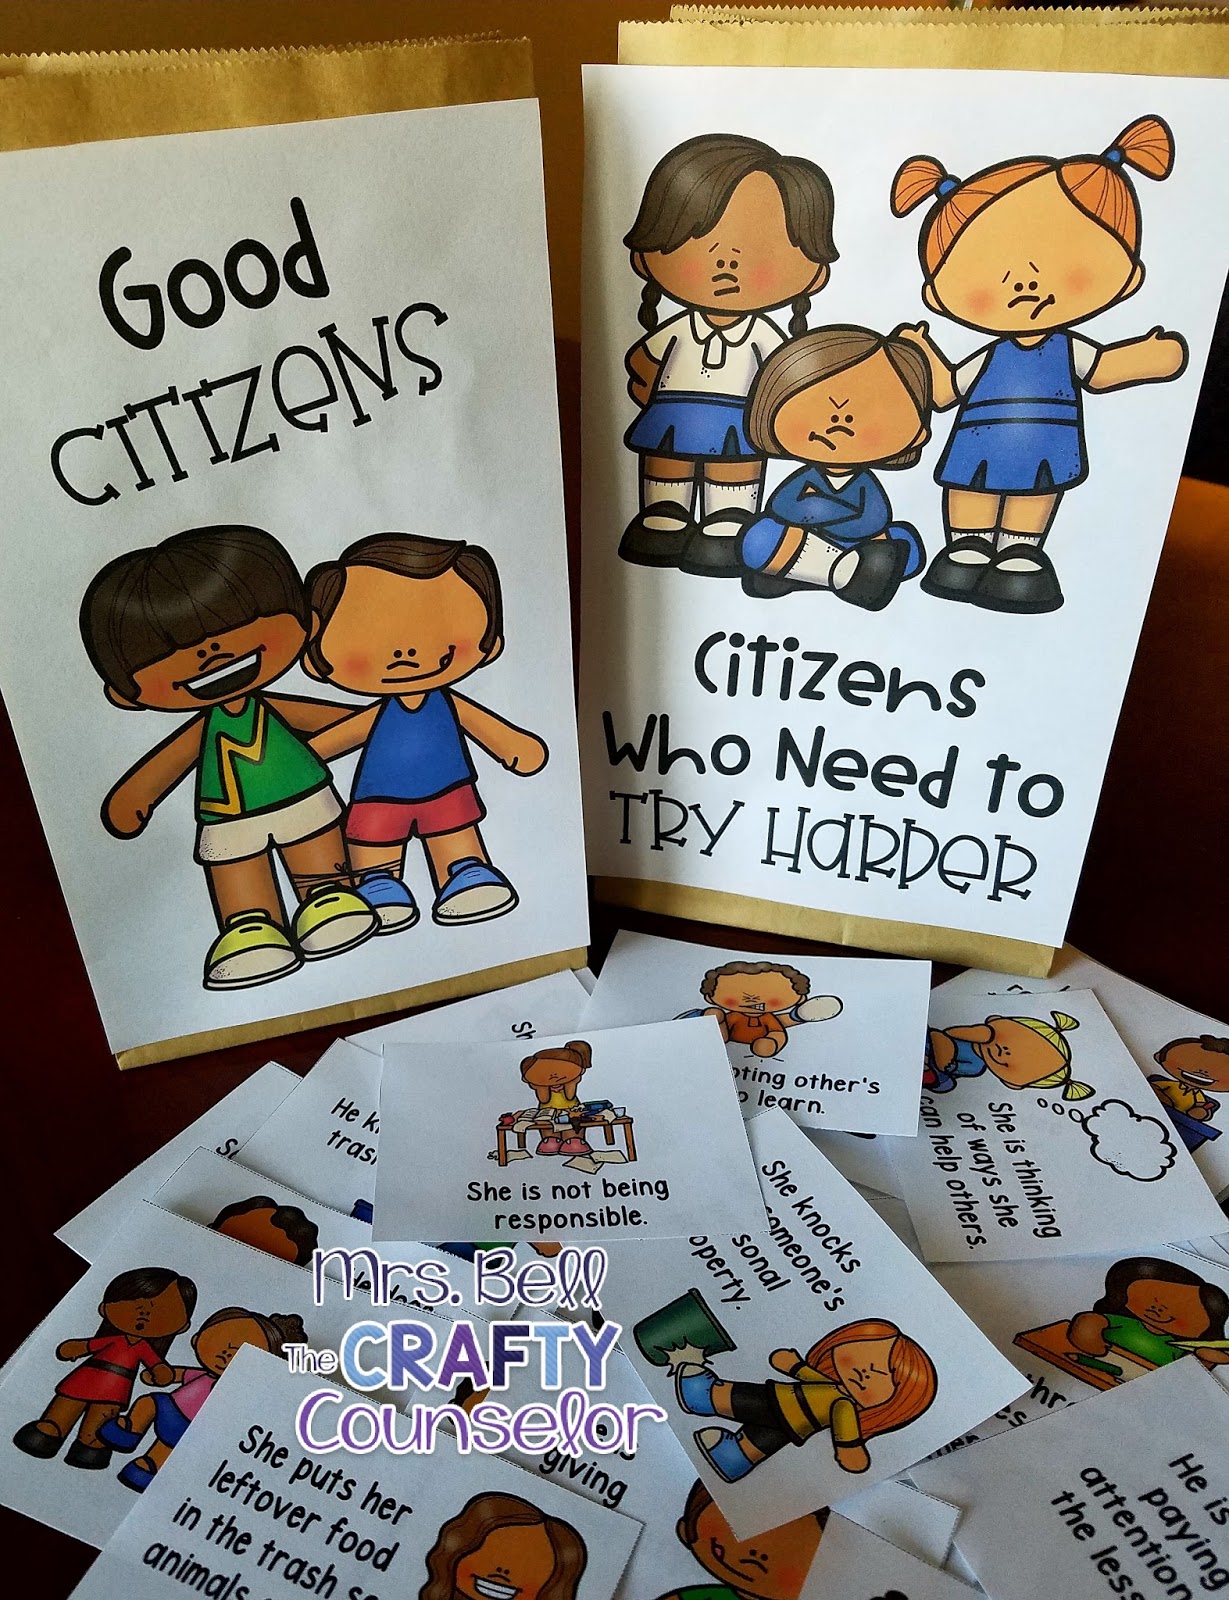 Good Citizens - Mrs. Bell The Crafty Counselor